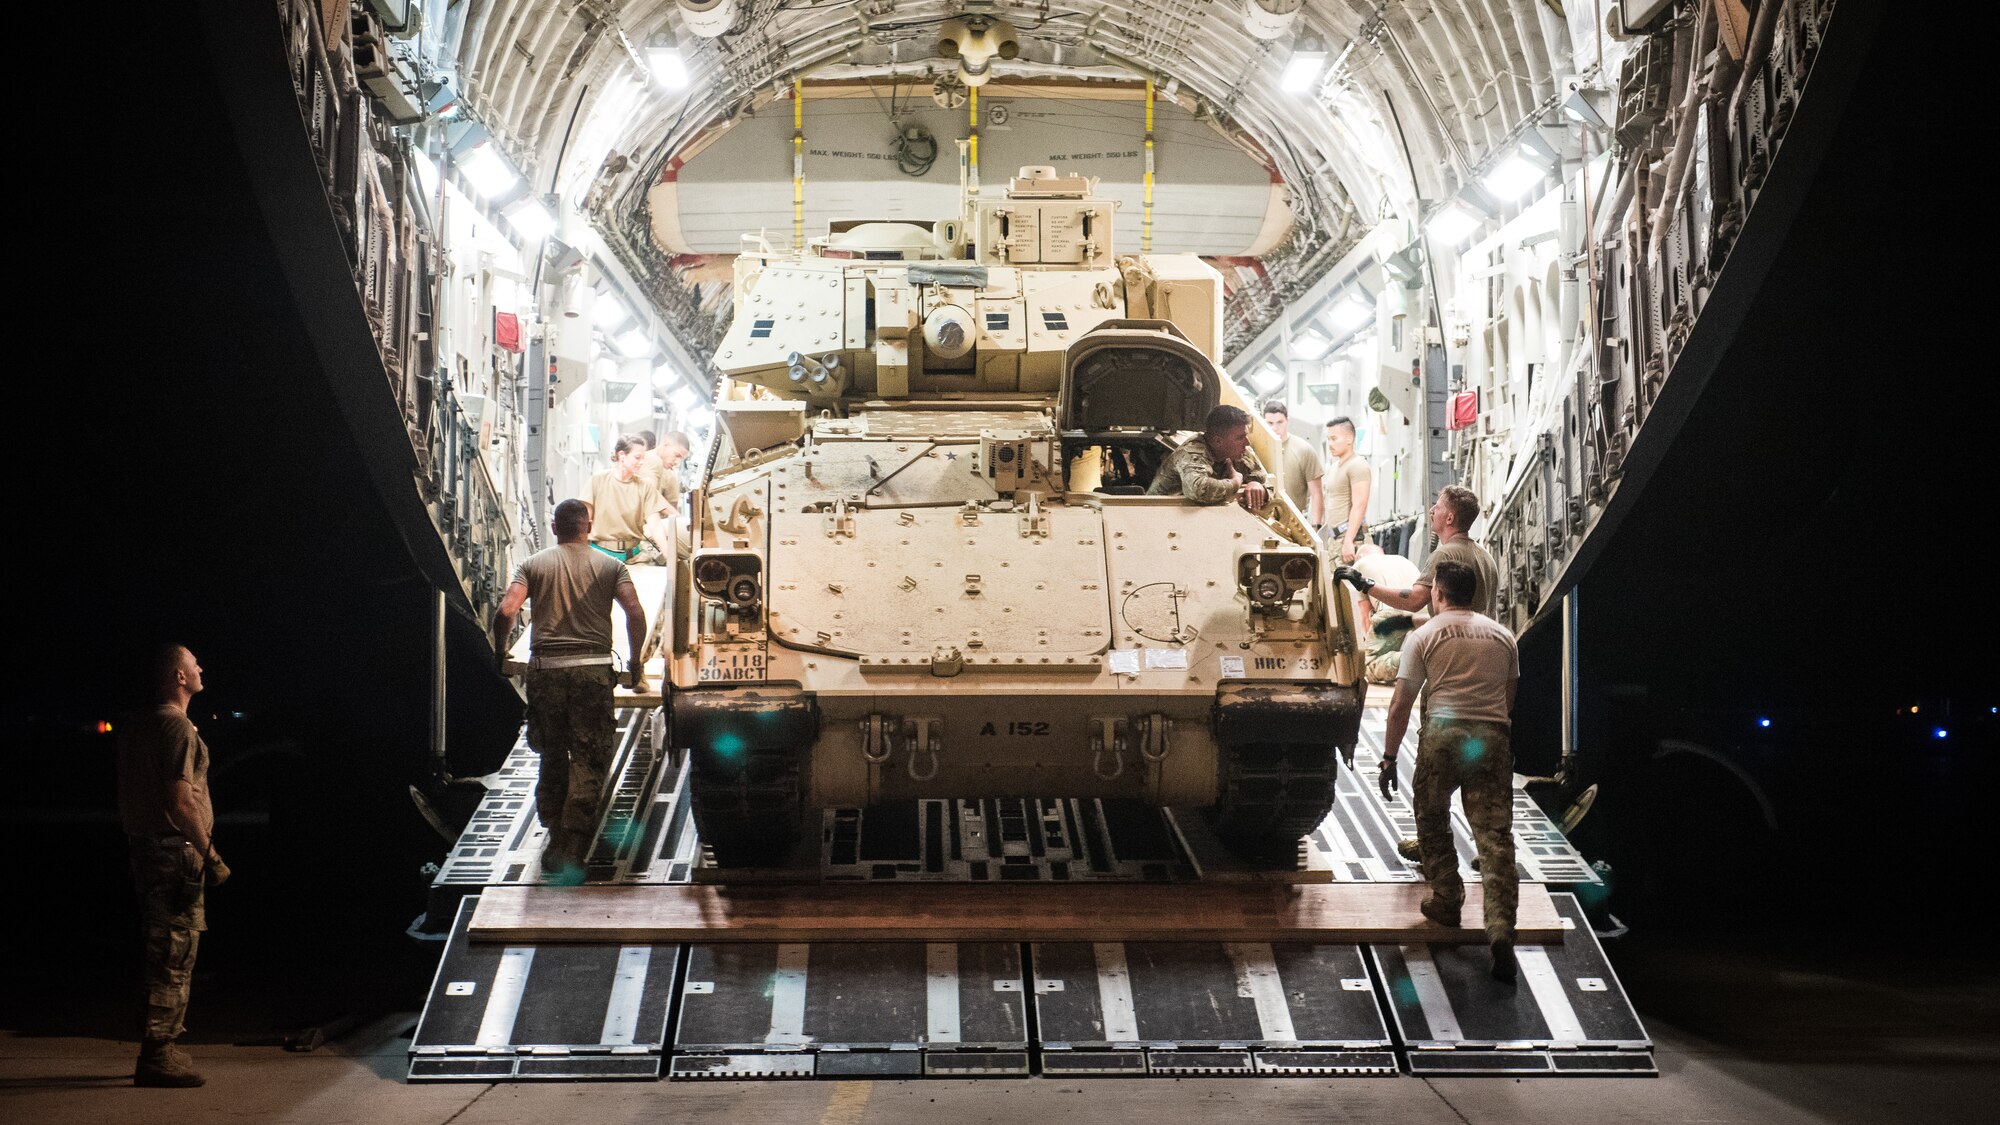 U.S. Airmen assigned to the 386th Expeditionary Logistics Readiness Squadron talk with a U.S. Army Soldier driving a U.S. Army M2 Bradley Fighting Vehicle onto a U.S. Air Force C-17 Globemaster III at Ali Al Salem Air Base, Kuwait, Oct. 30, 2019. Airmen and Soldiers coordinated efforts to transport the BFV within the U.S. Central Command theater of operations to assist in ongoing efforts within the region. (U.S. Air Force photo by Capt. Thomas Barger)